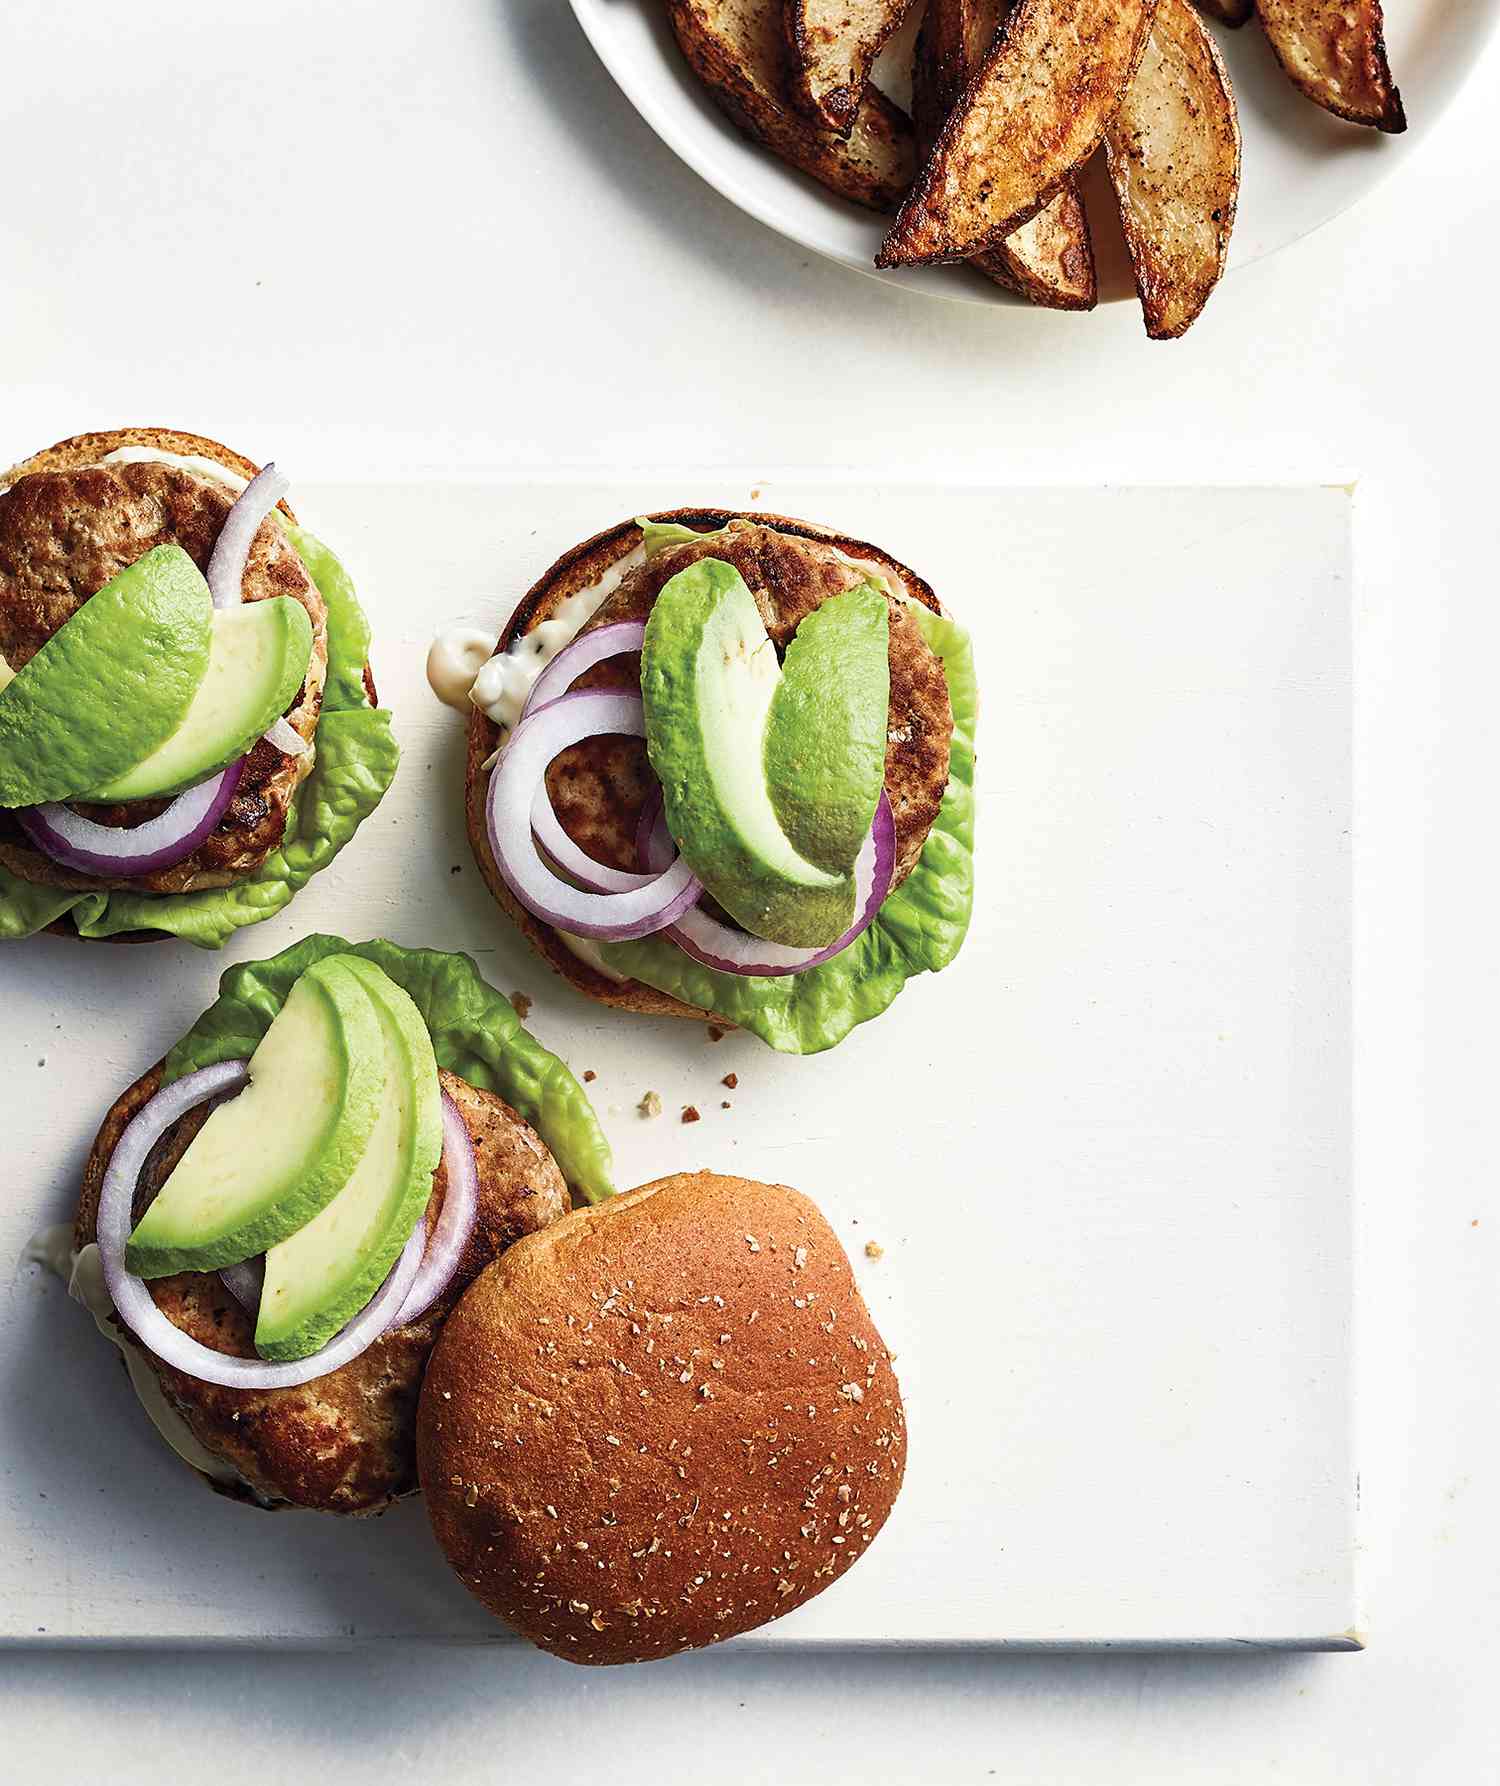 Turkey Burgers With Lime Mayo and Avocado